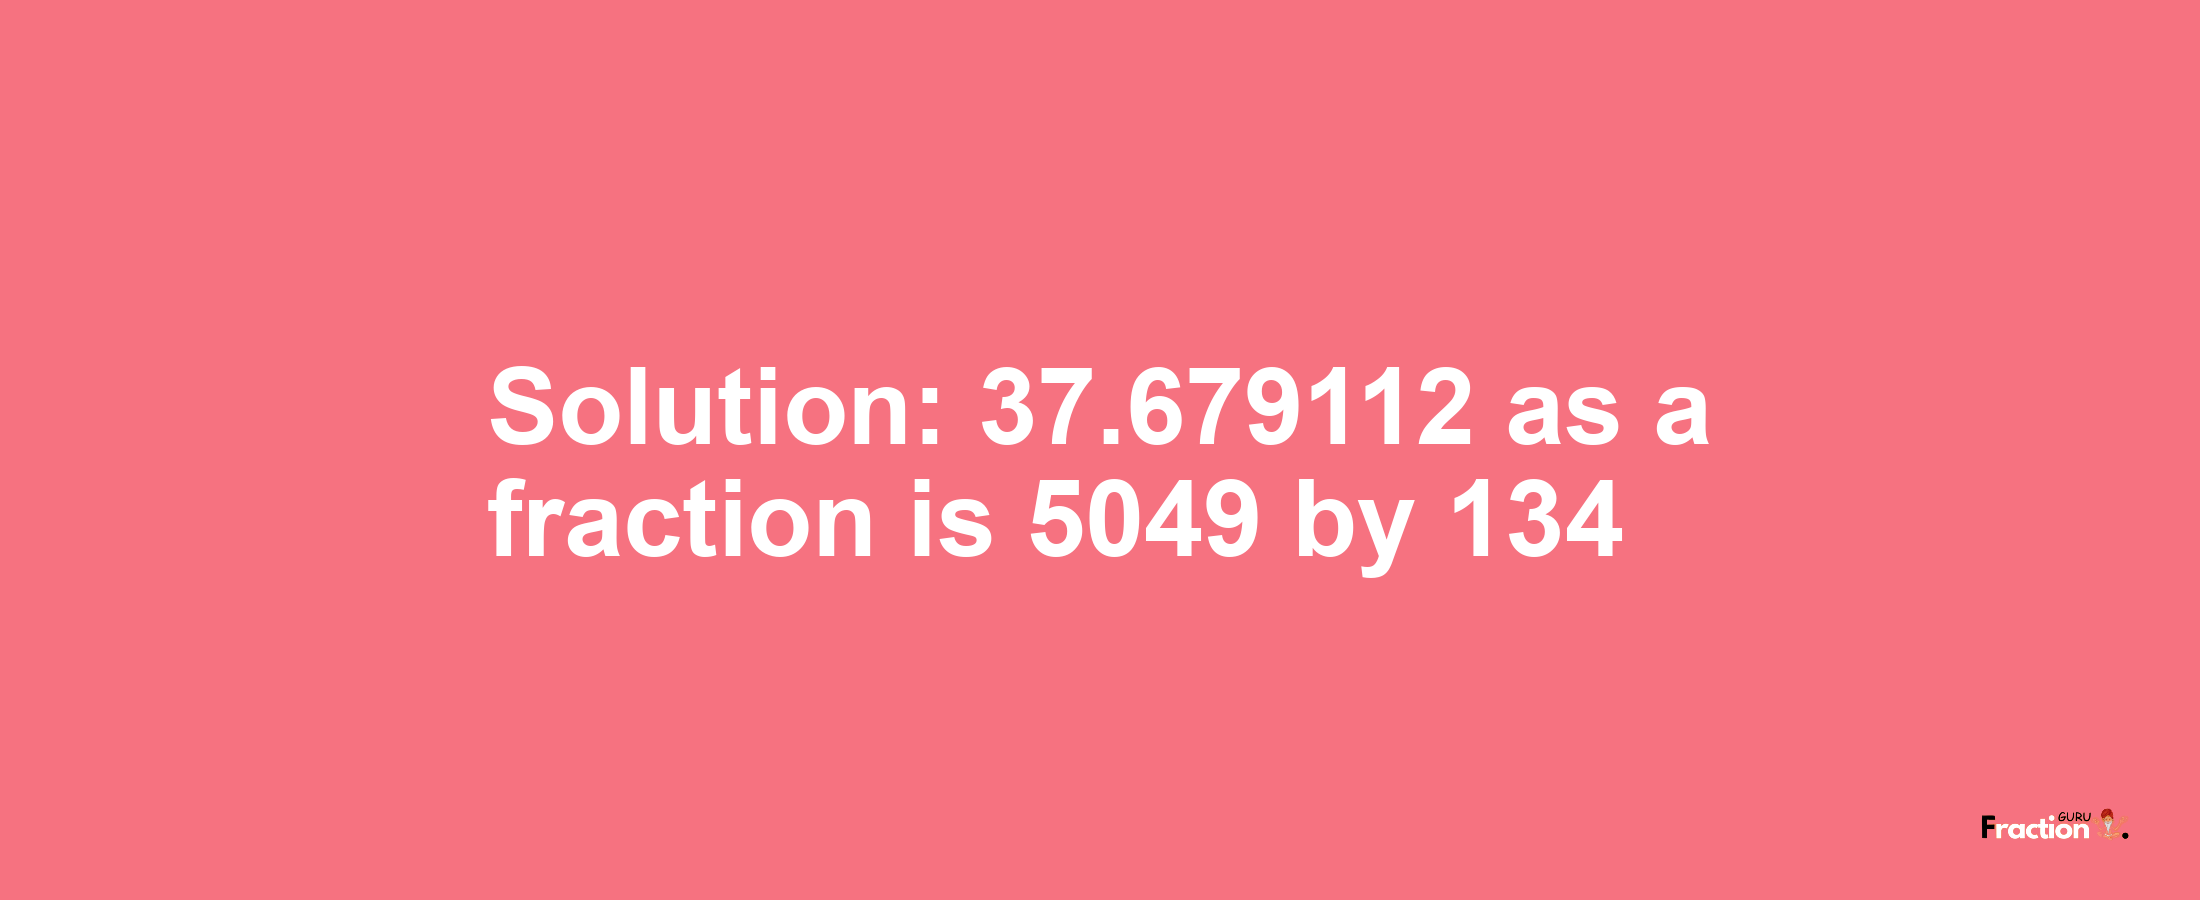 Solution:37.679112 as a fraction is 5049/134